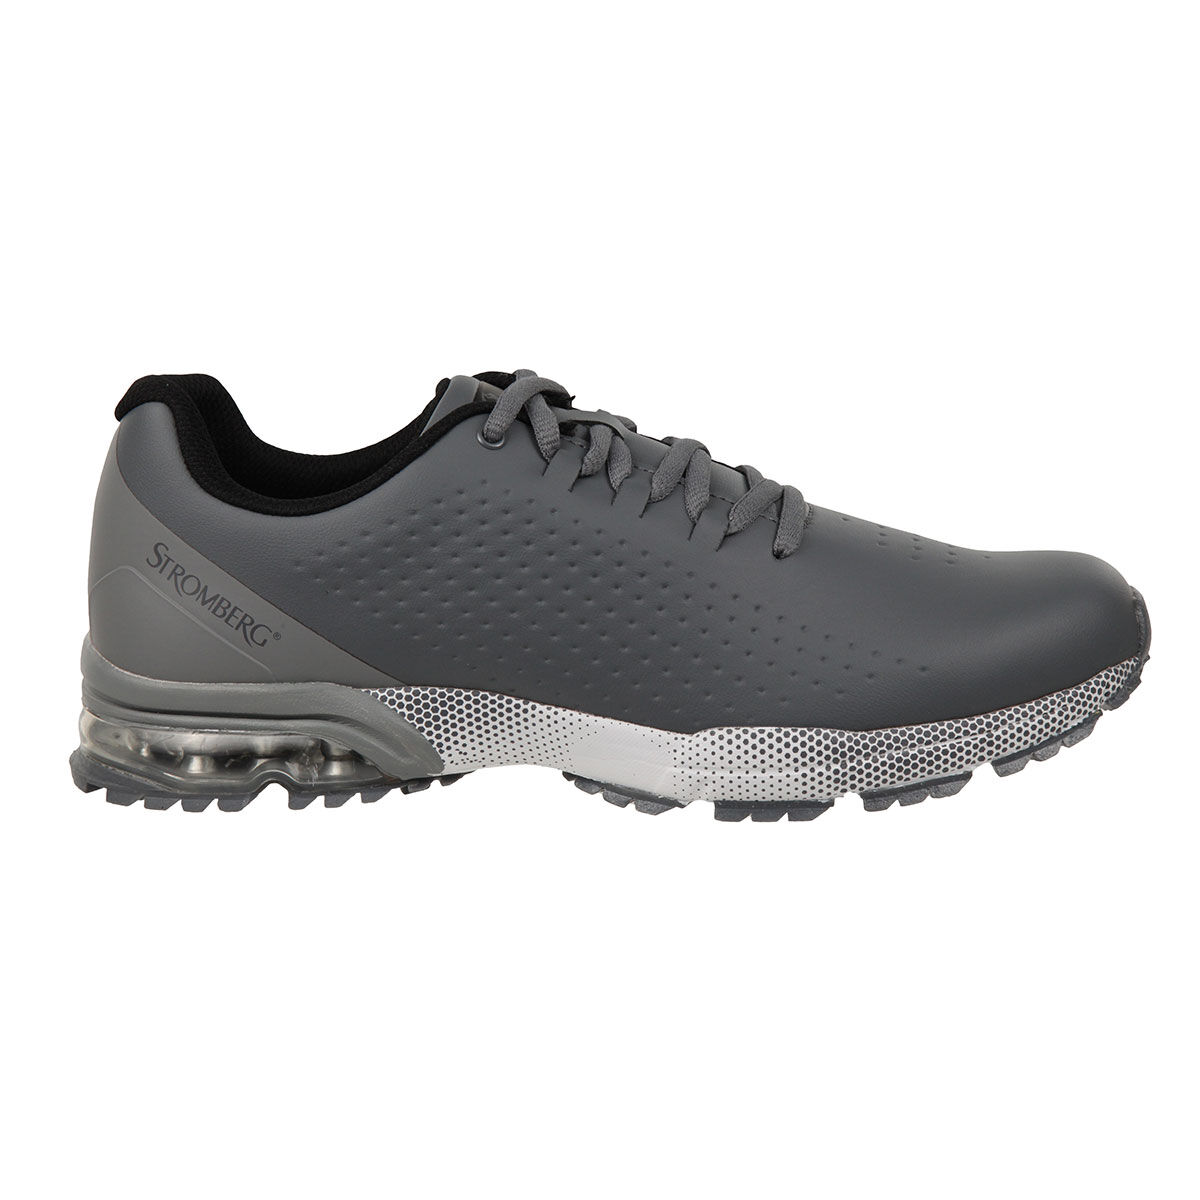 Stromberg Golf Shoes, Mens Dark Grey Waterproof Ailsa Spikeless, Size: 7 | American Golf - Father's Day Gift von Stromberg